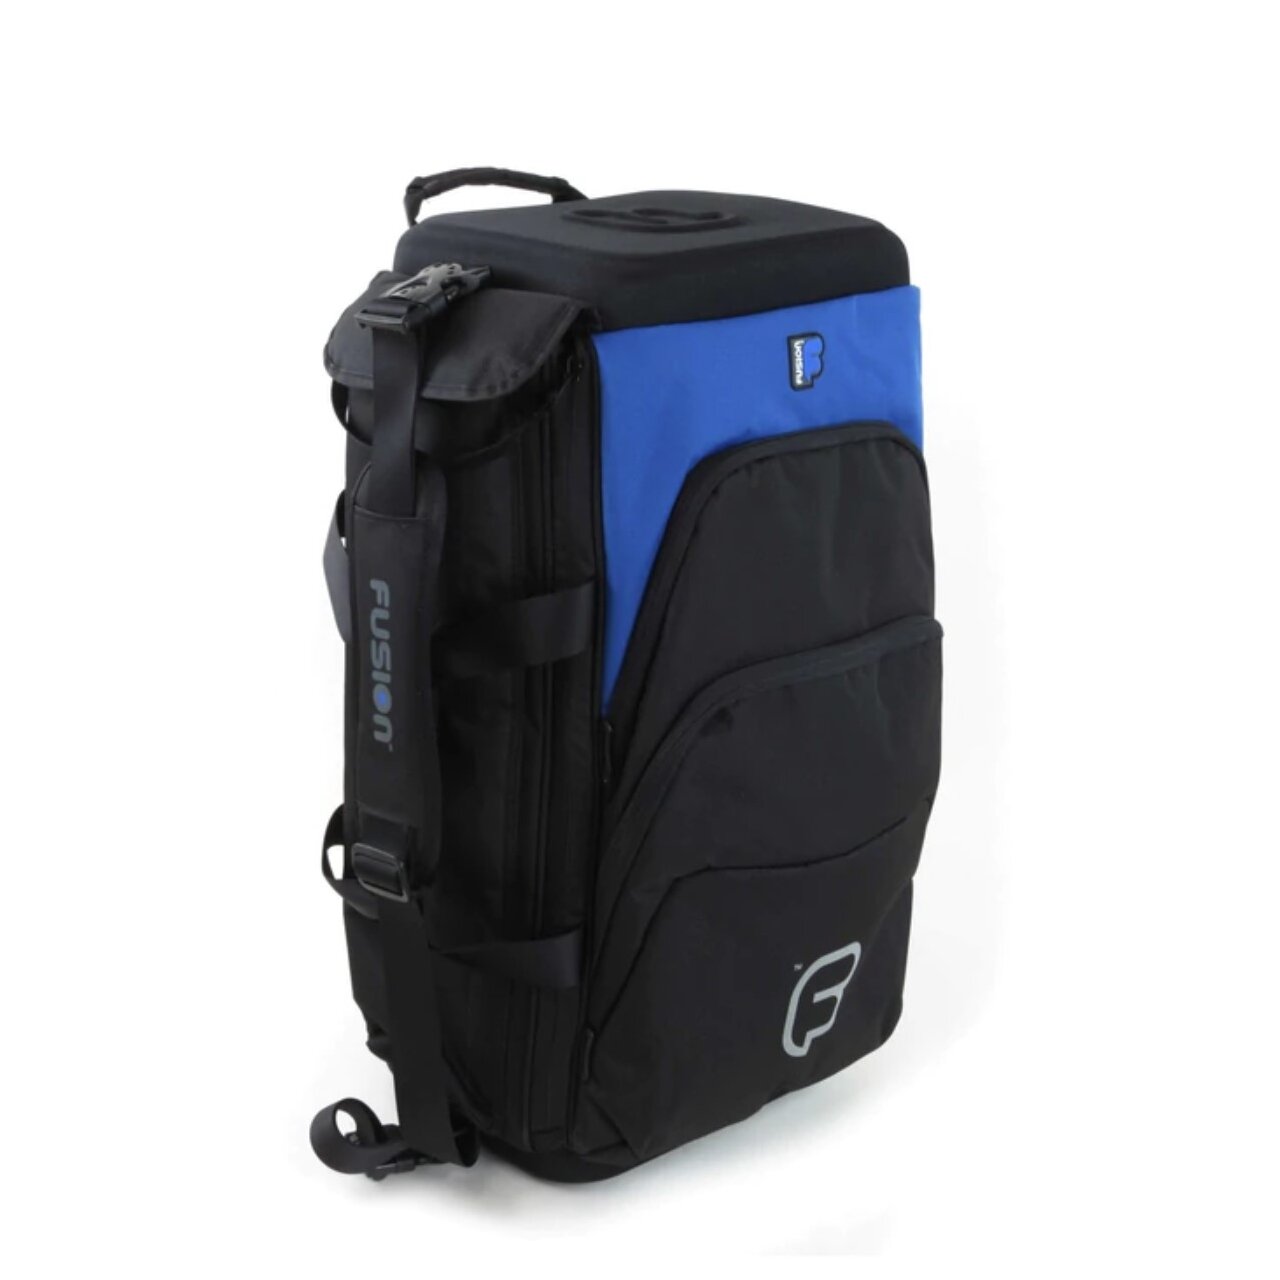 Fusion Urban Backpack Bag for 3 Trumpets black and blue : photo 1